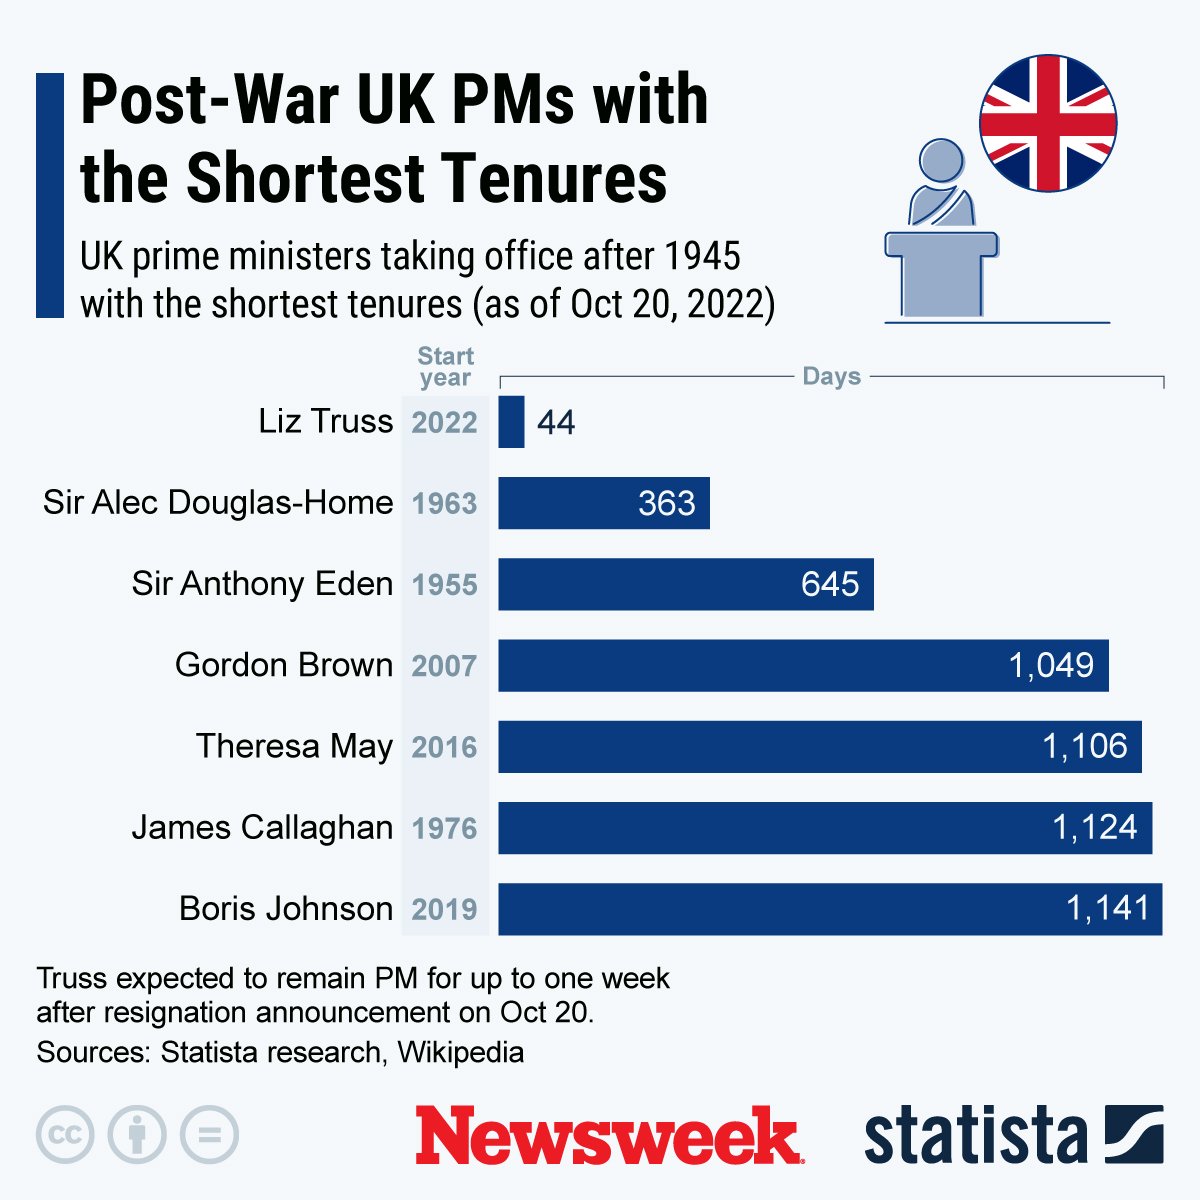 UK Prime Ministers with the Shortest Tenures